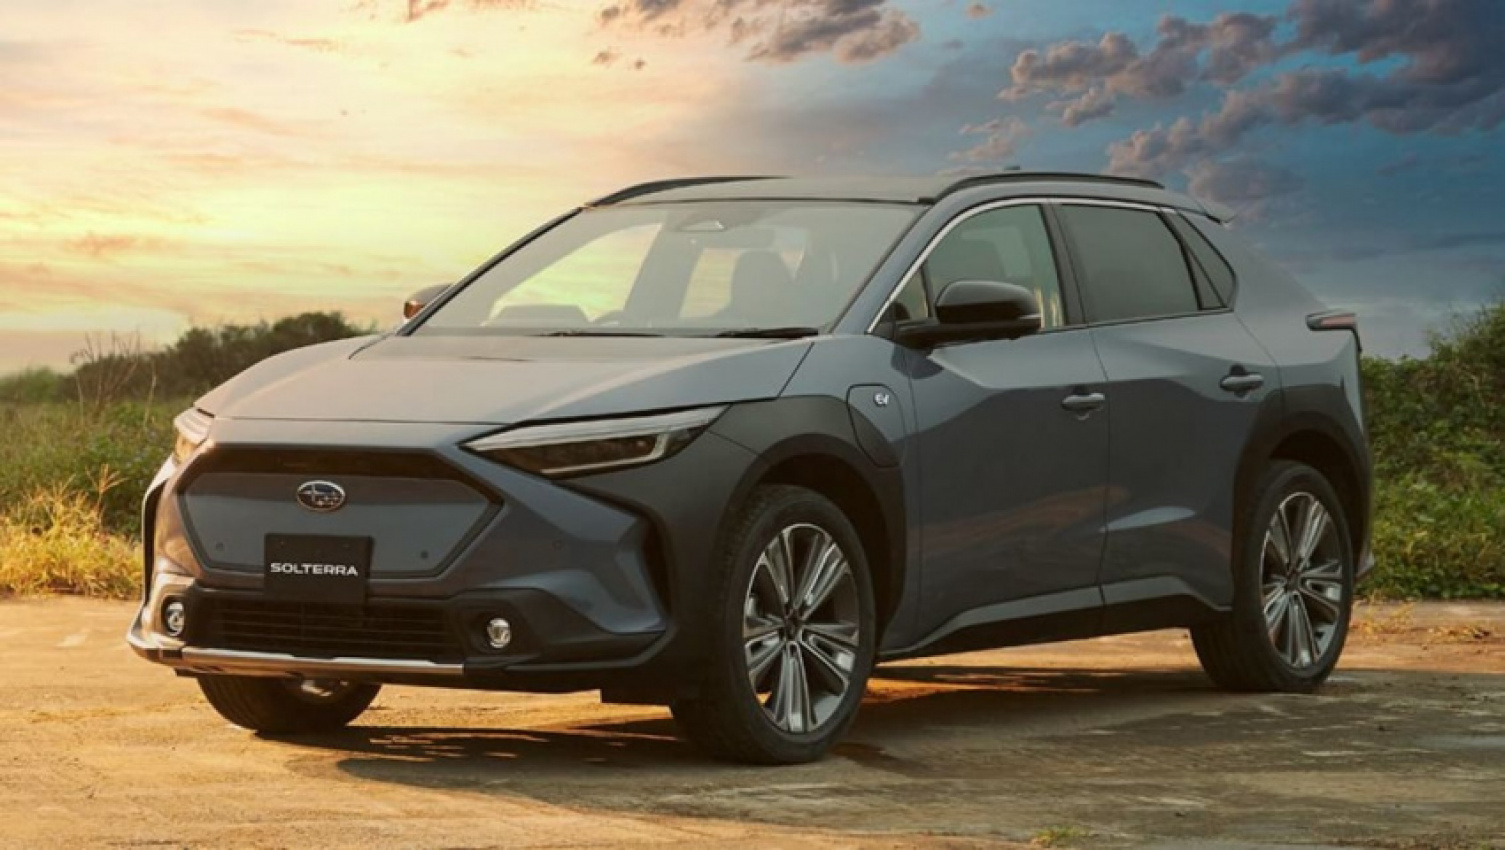 autos, cars, subaru, toyota, subaru's ev bargain is cheaper than the toyota bz4x? international pricing hints at sharp price point for solterra ev ahead of locked-in australian launch